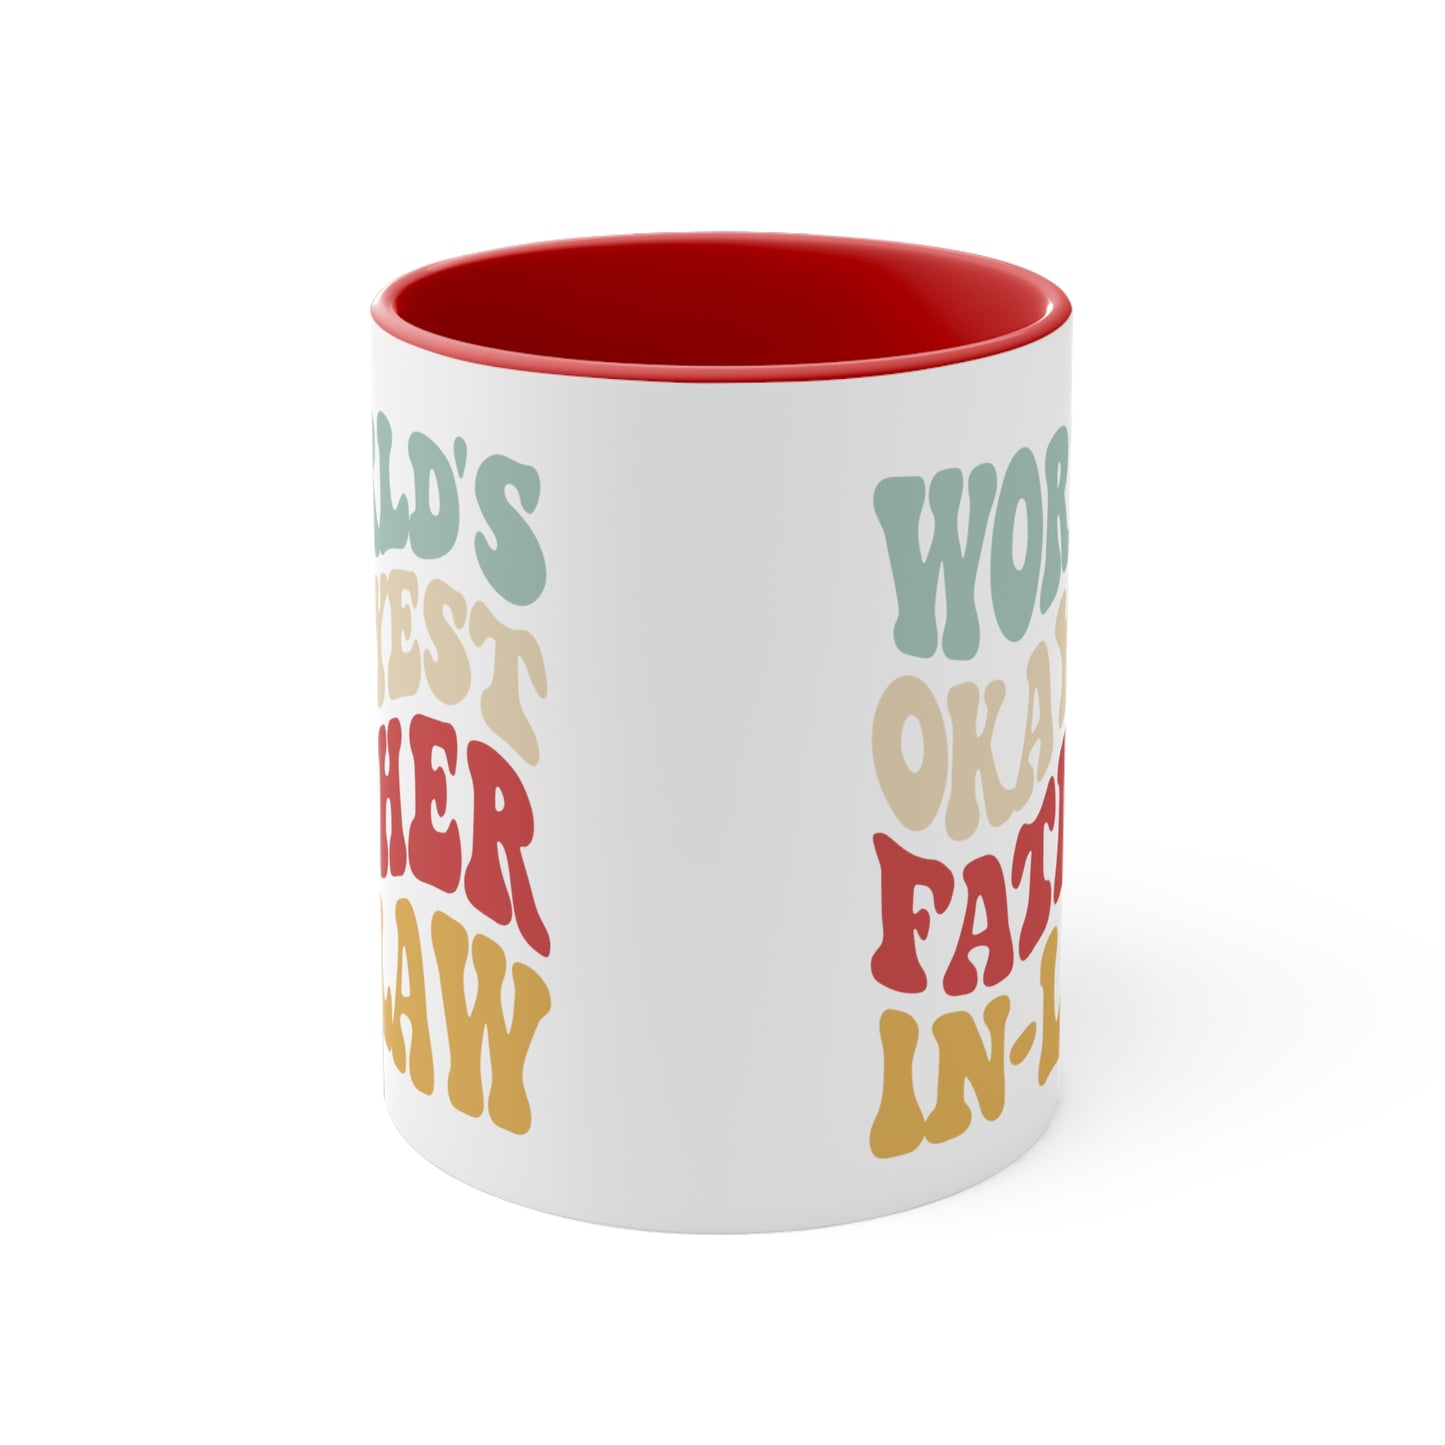 World's Okayest Father-In-Law Accent Coffee Mug, 11oz